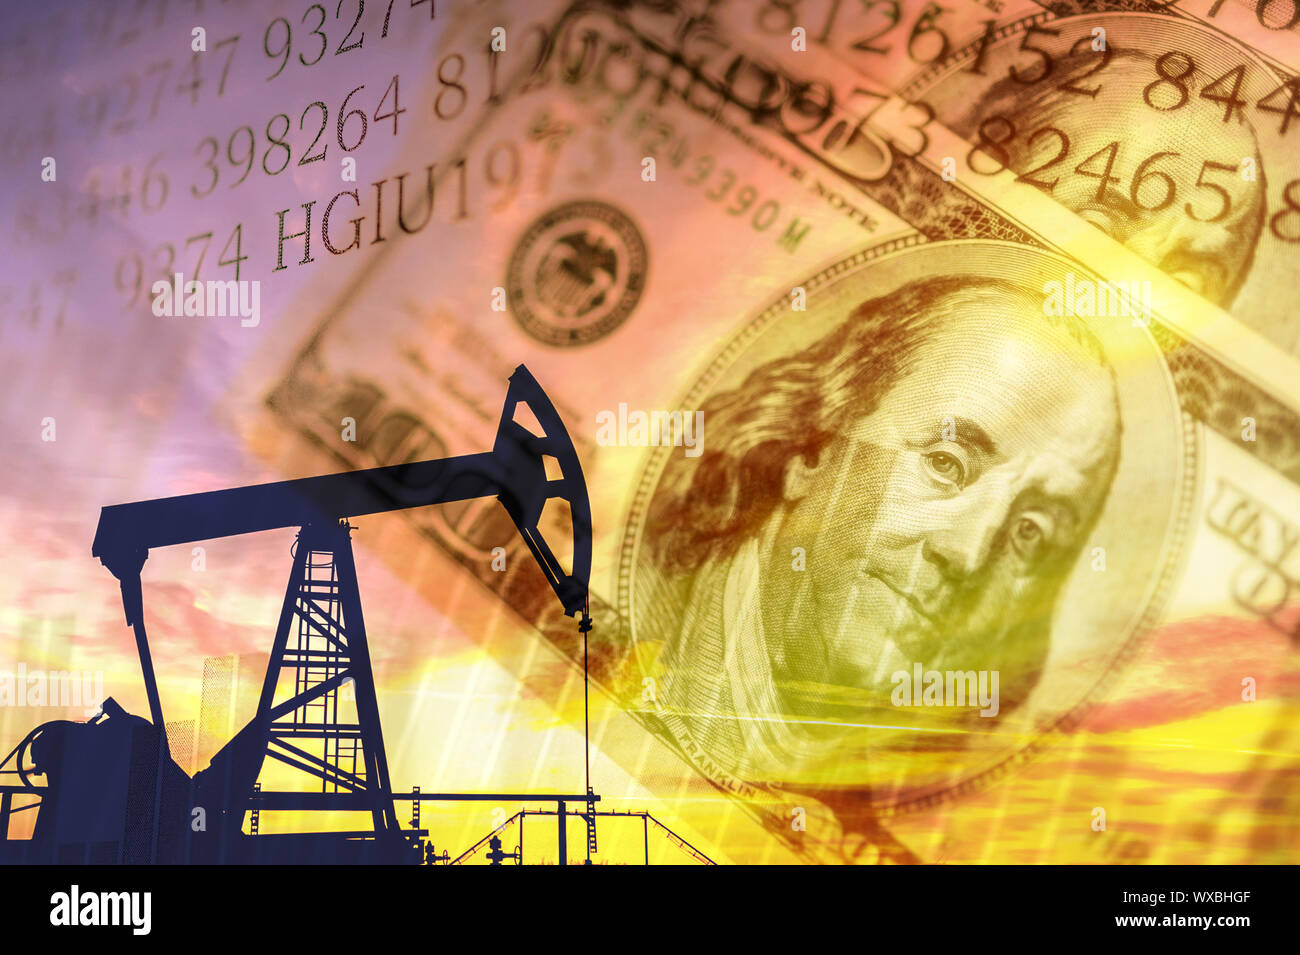 Oil and gas industry, business and financial background. Mining, oil refinery industry and stock market concept. Stock Photo